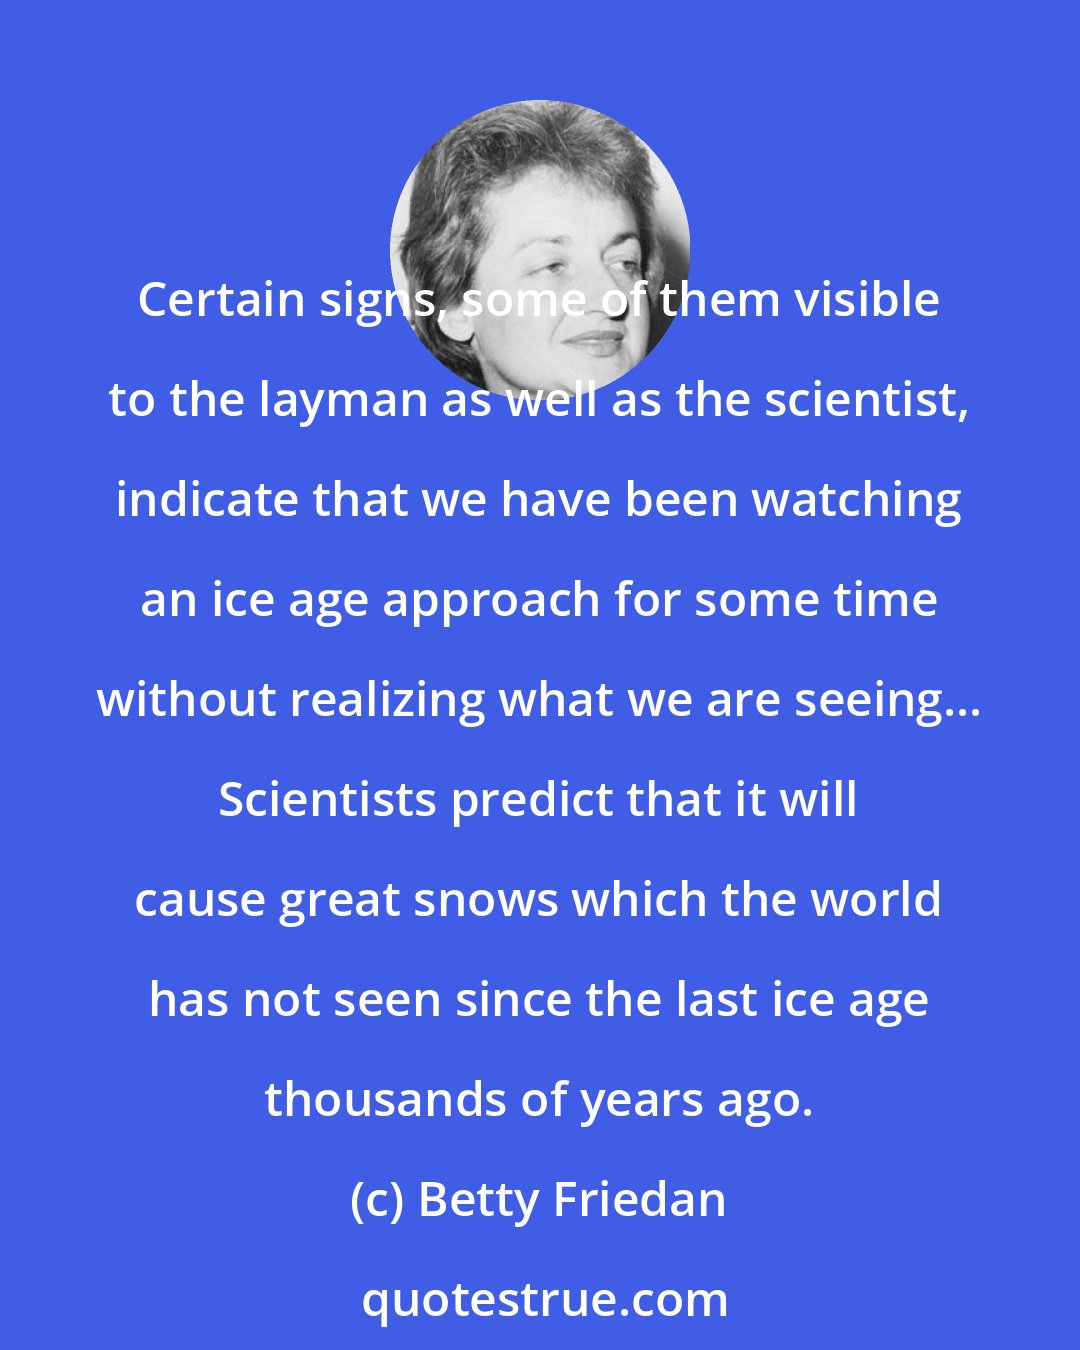 Betty Friedan: Certain signs, some of them visible to the layman as well as the scientist, indicate that we have been watching an ice age approach for some time without realizing what we are seeing... Scientists predict that it will cause great snows which the world has not seen since the last ice age thousands of years ago.